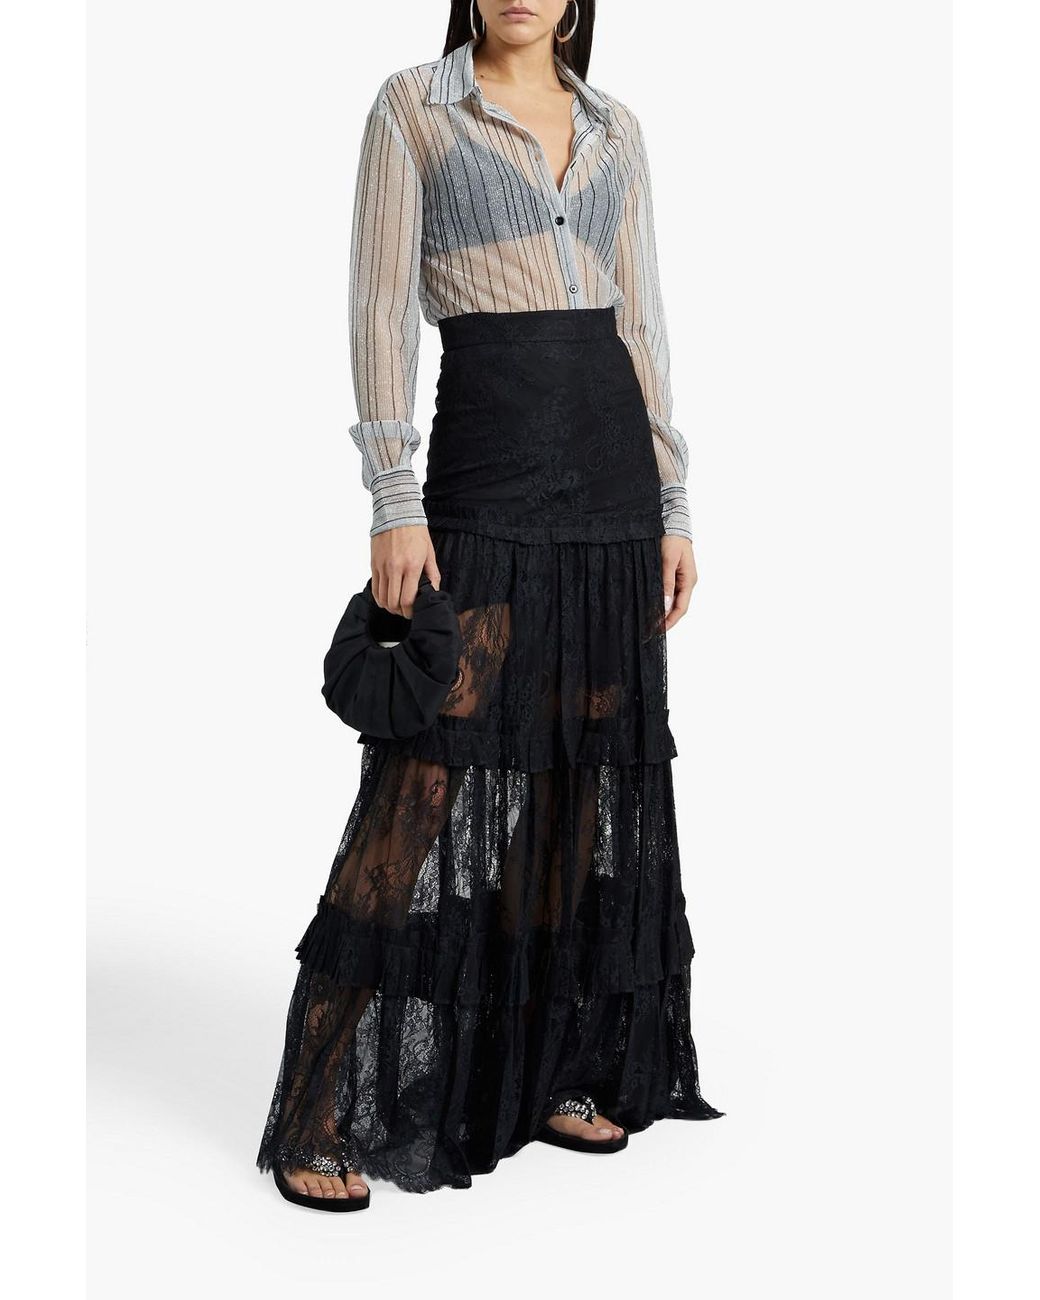 Alexis Yedda Tiered Chantilly Lace Maxi Skirt in Black | Lyst